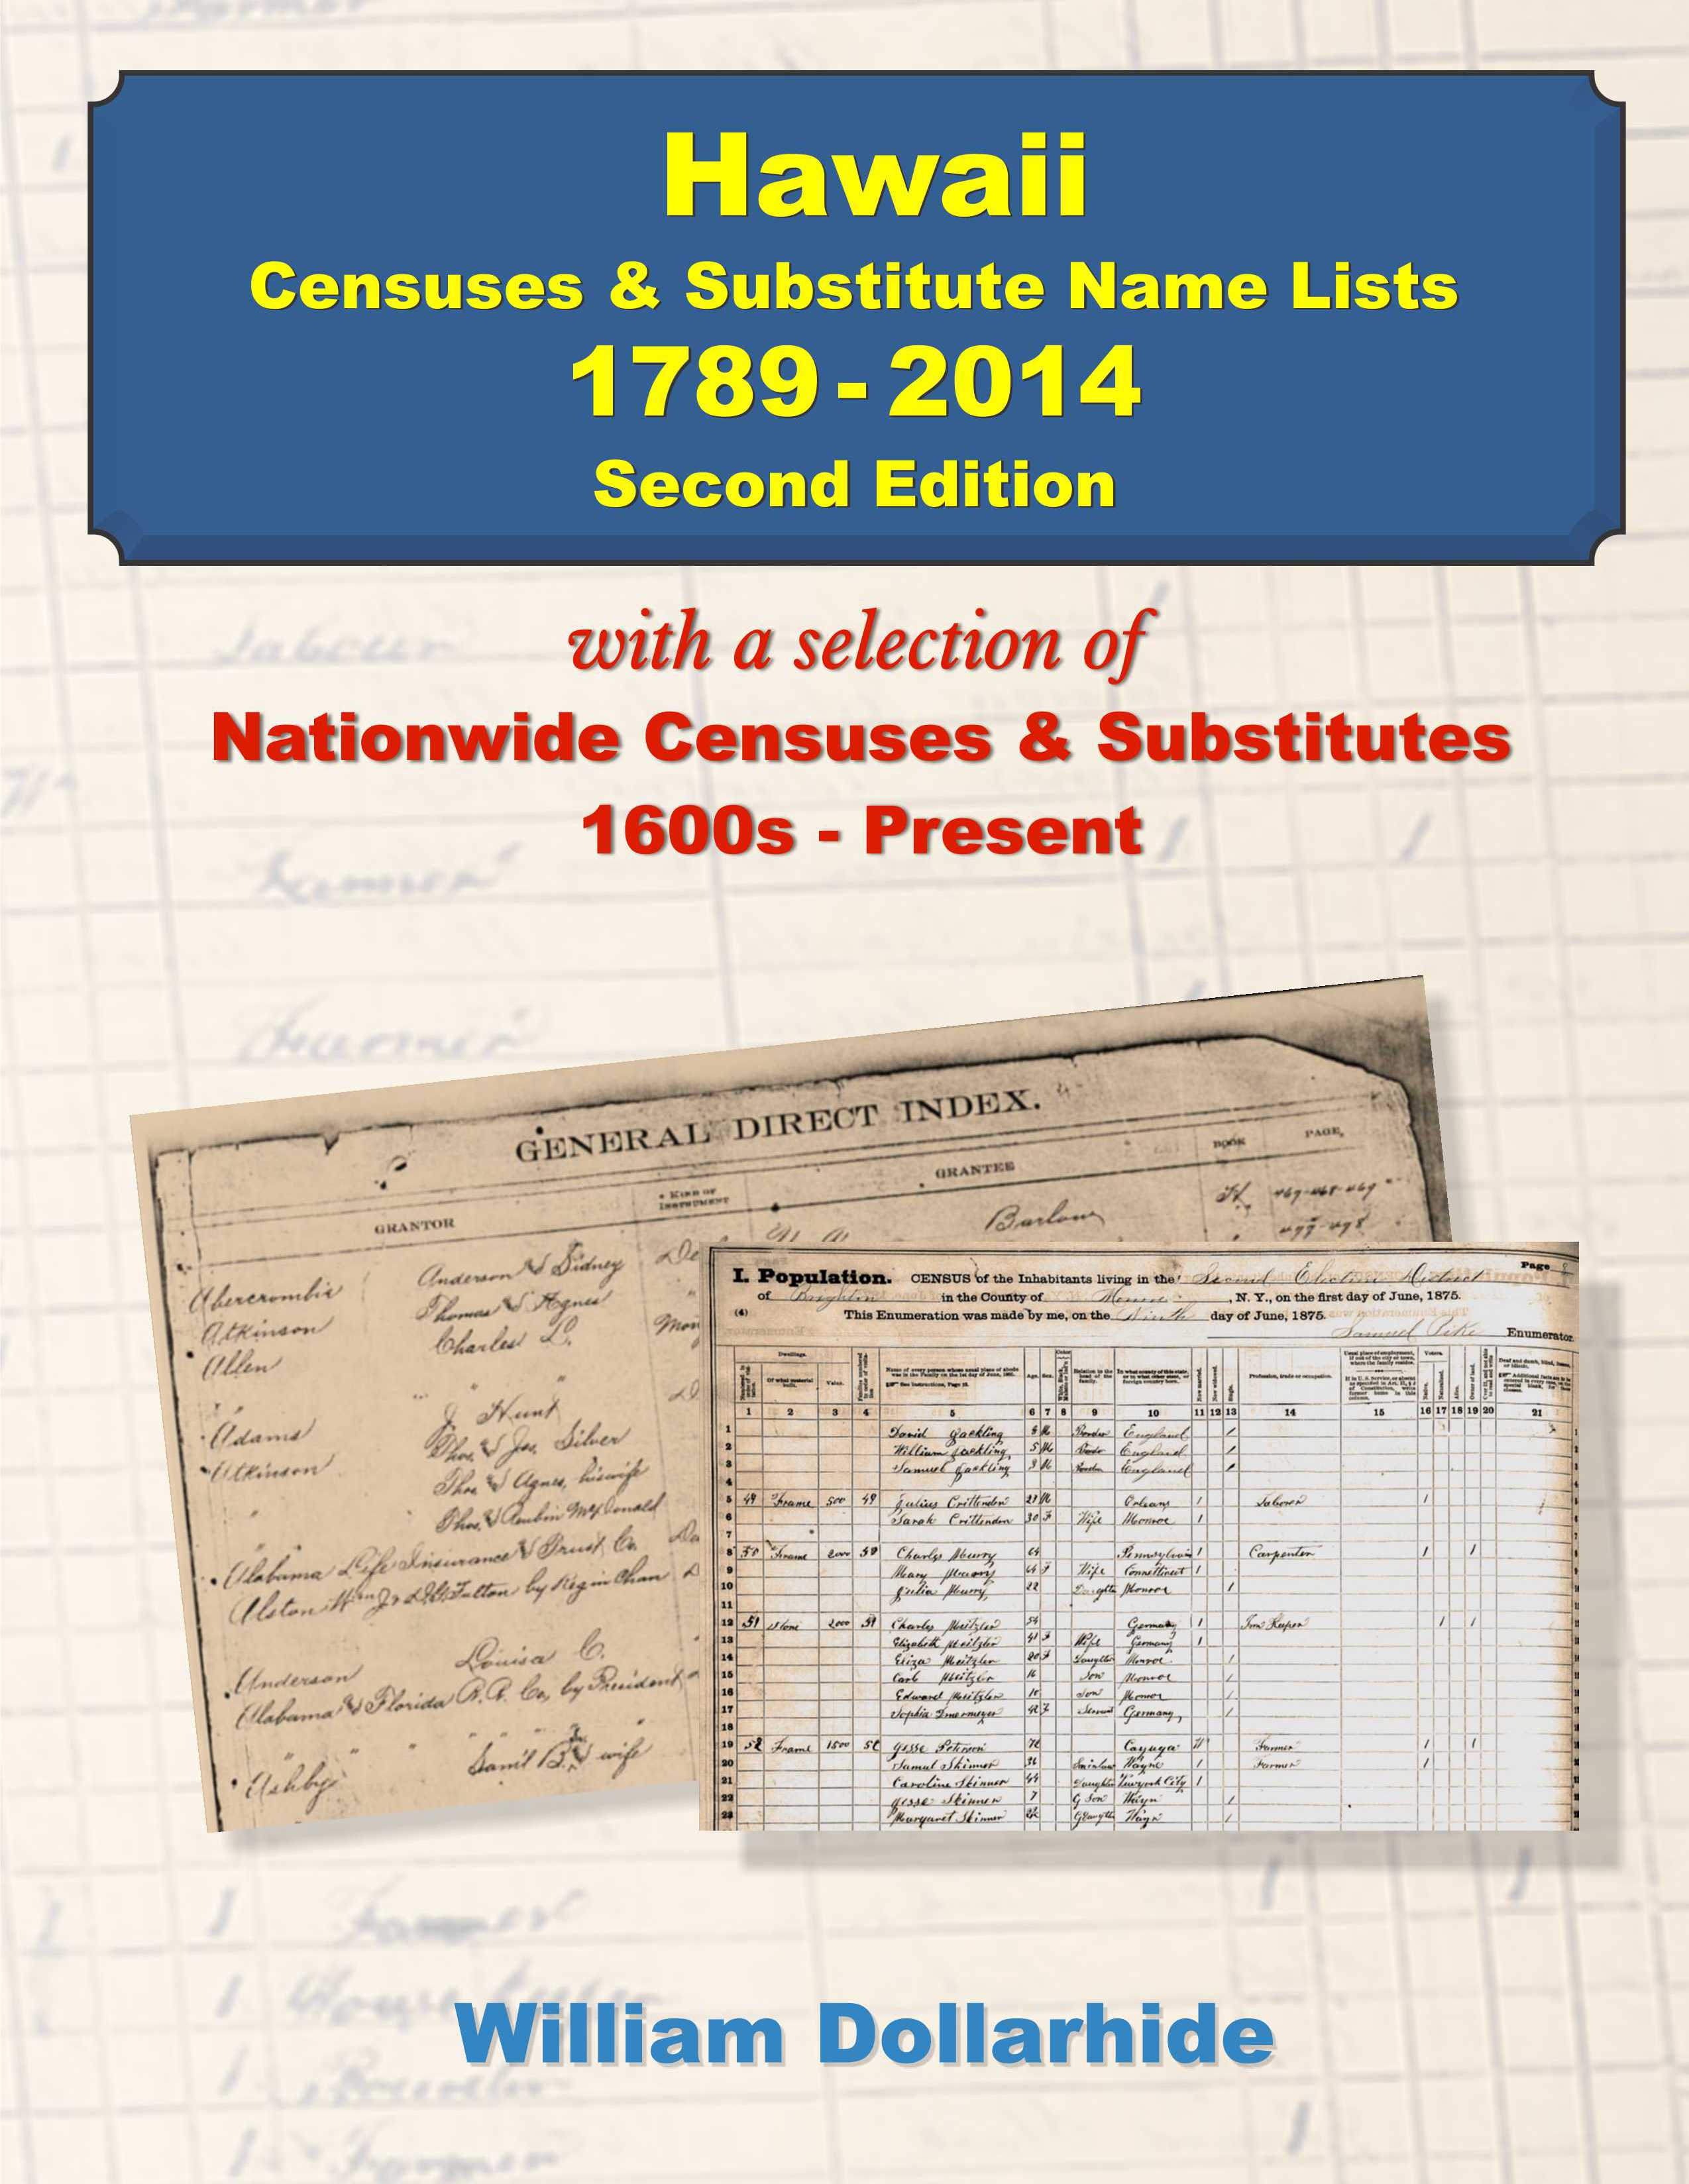 Hawaii Censuses & Substitute Name Lists, 1789-2014 – Second Edition - SOFTBOUND